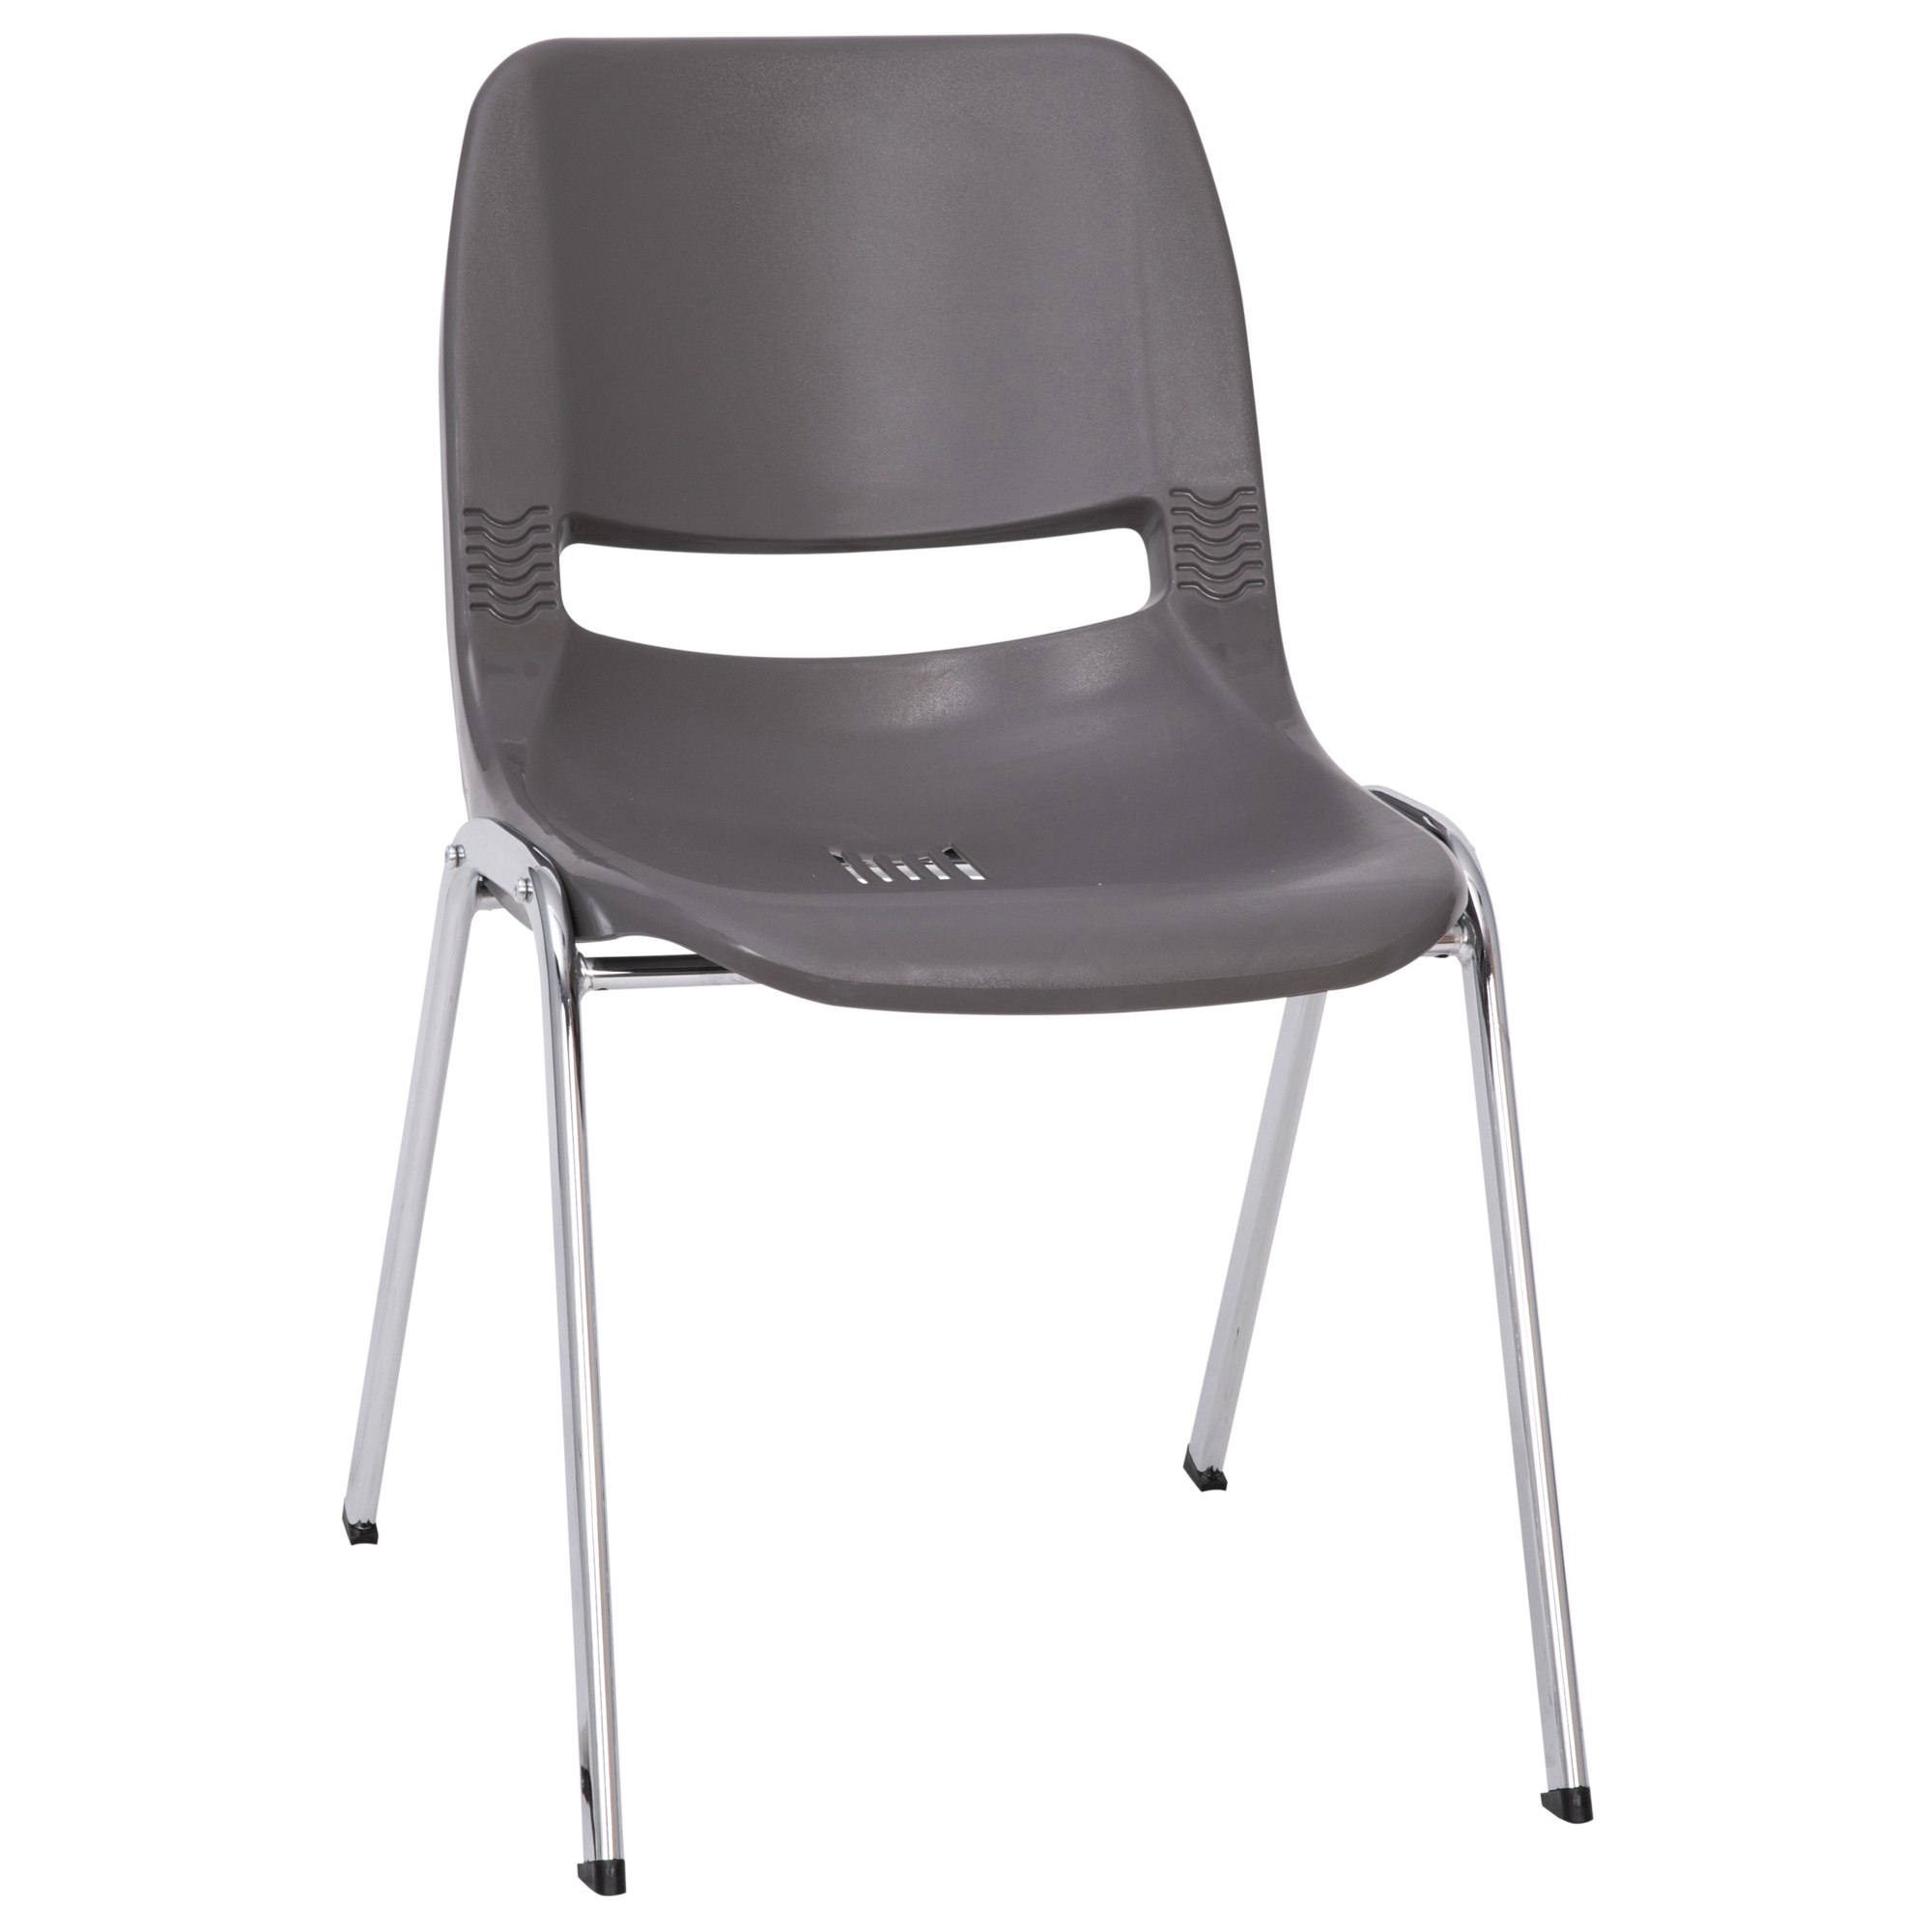 Flash Furniture, 880 lb. Capacity Gray Stack Chair w/ Chrome Frame, Primary Color Gray, Included (qty.) 1, Model RUT18GYCHR